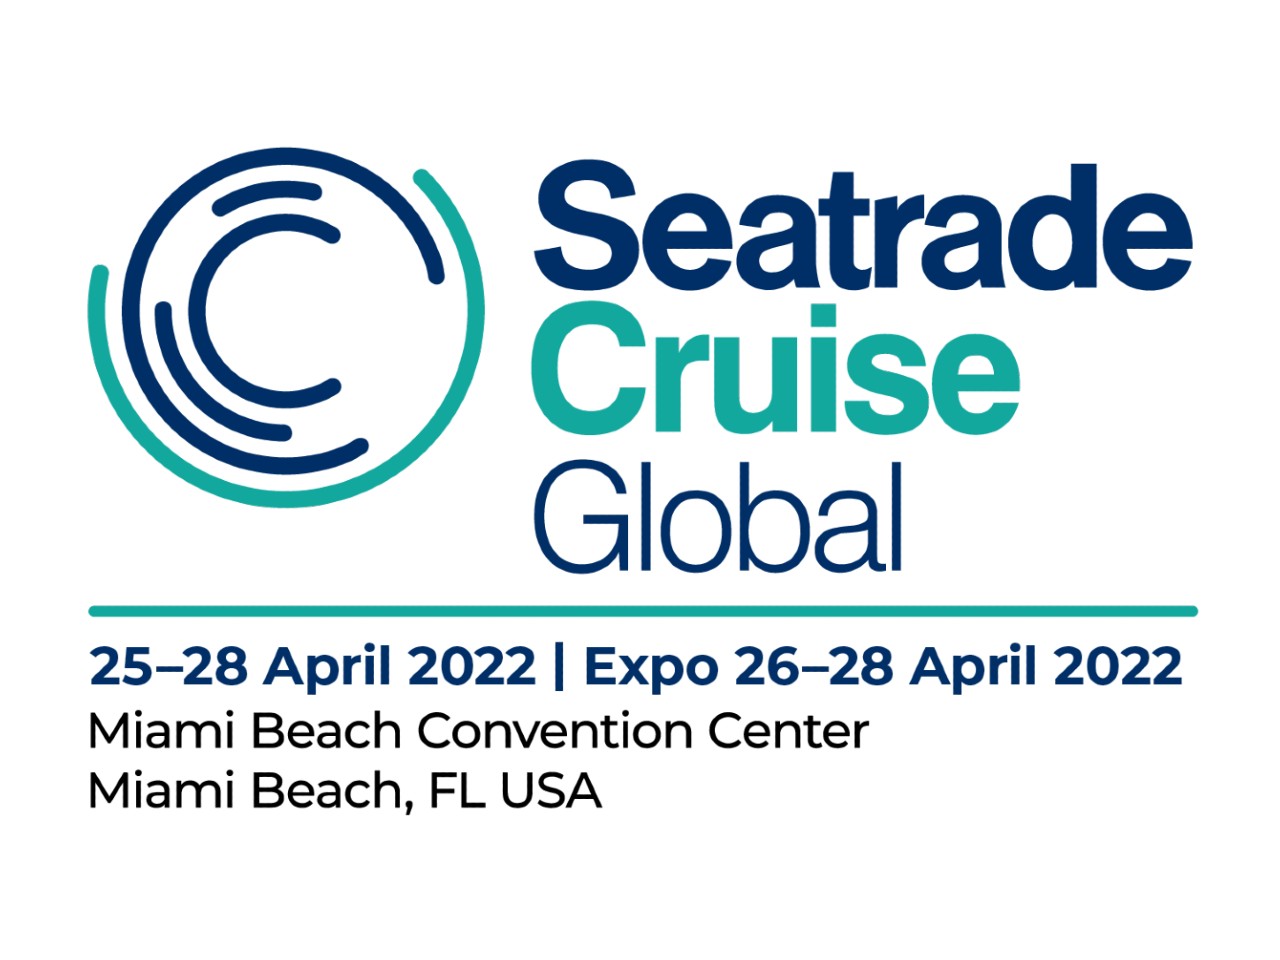 Seatrade Cruise Global 2022 is near (April 25-28)